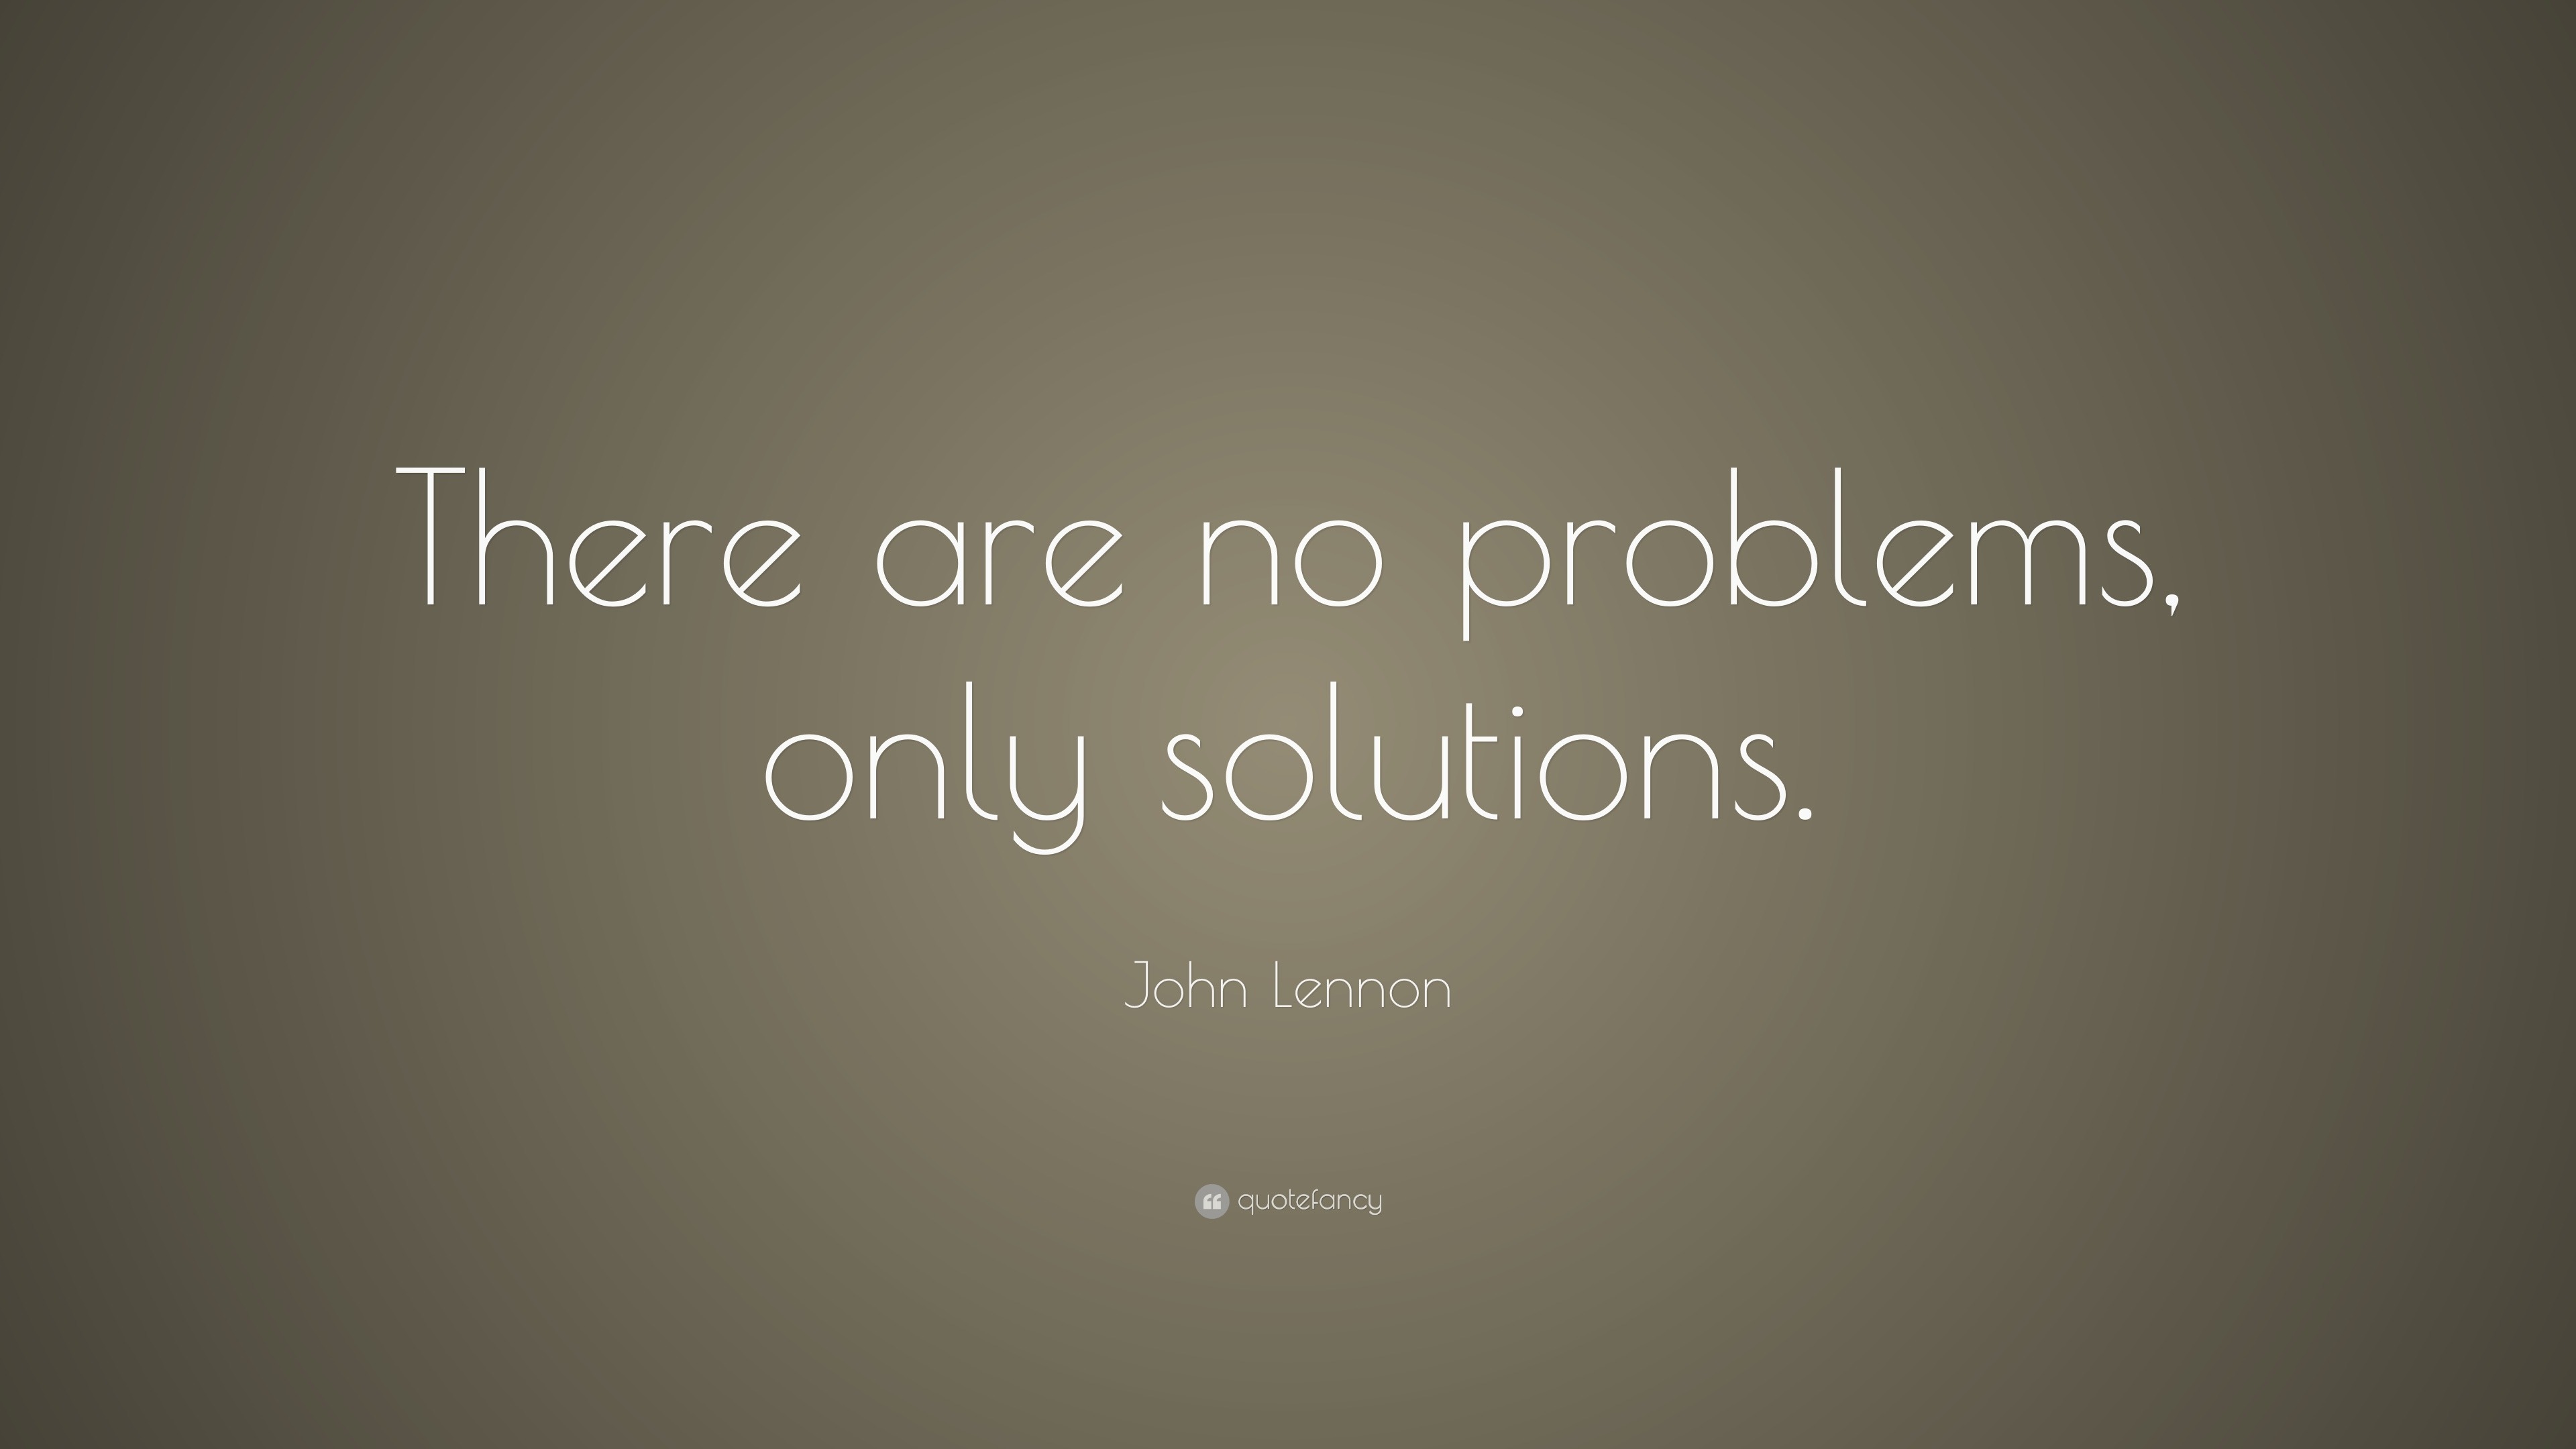 John Lennon Quote: “There are no problems, only solutions.”